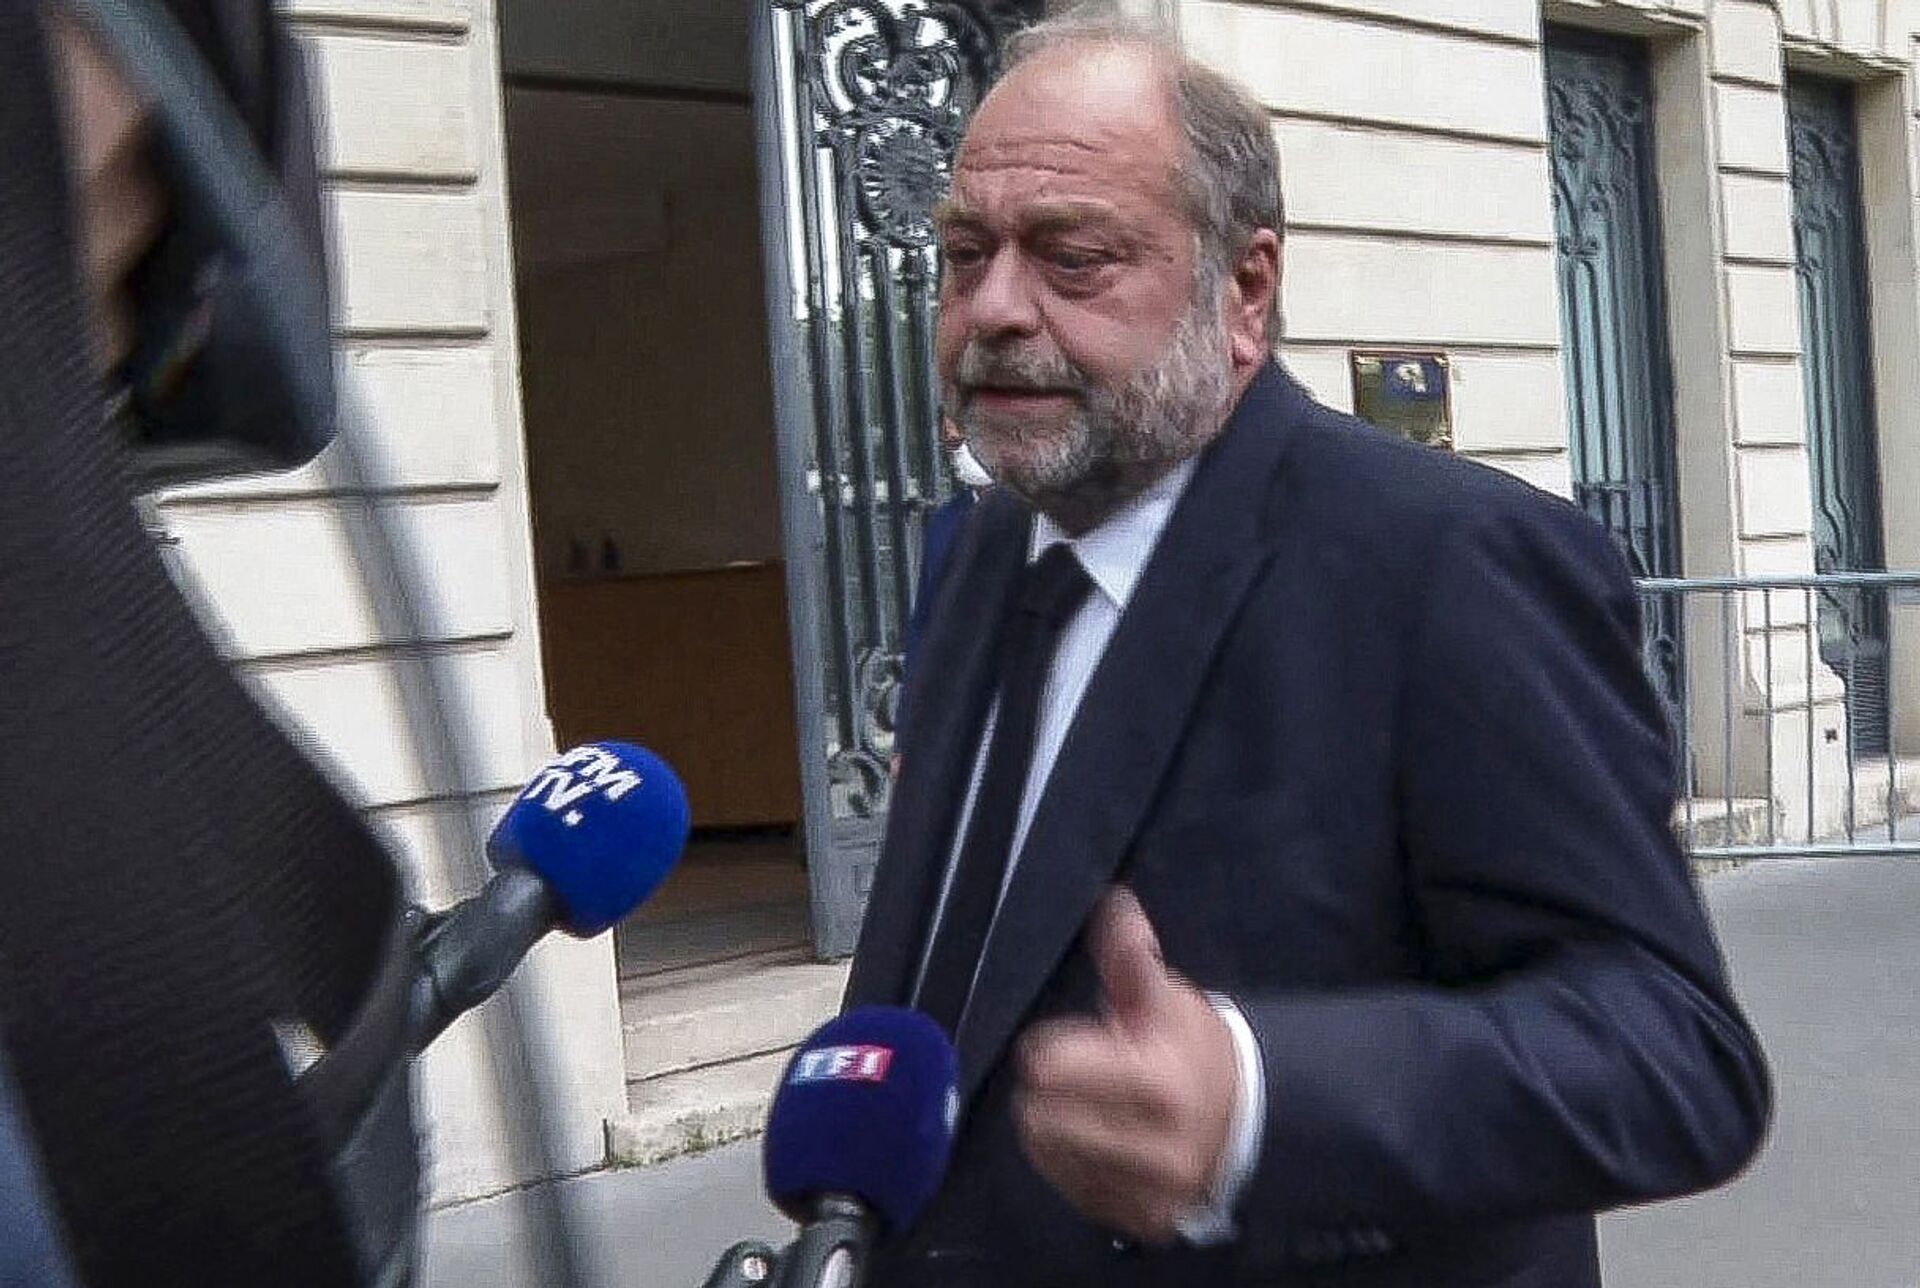 This video grab taken from AFPTV on July 16, 2021, shows France's Justice Minister Eric Dupond-Moretti speaking to the press as he arrives at the Court of Justice for questioning in Paris. - French Justice Minister Eric Dupond-Moretti appeared in court on July 16,2021, for questioning that could lead to charges over alleged conflict of interest. The 60-year-old star lawyer was recruited by President Emmanuel Macron just a year ago, swapping his life as one of the country's most famous criminal lawyers for a career in politics.  - Sputnik International, 1920, 07.09.2021